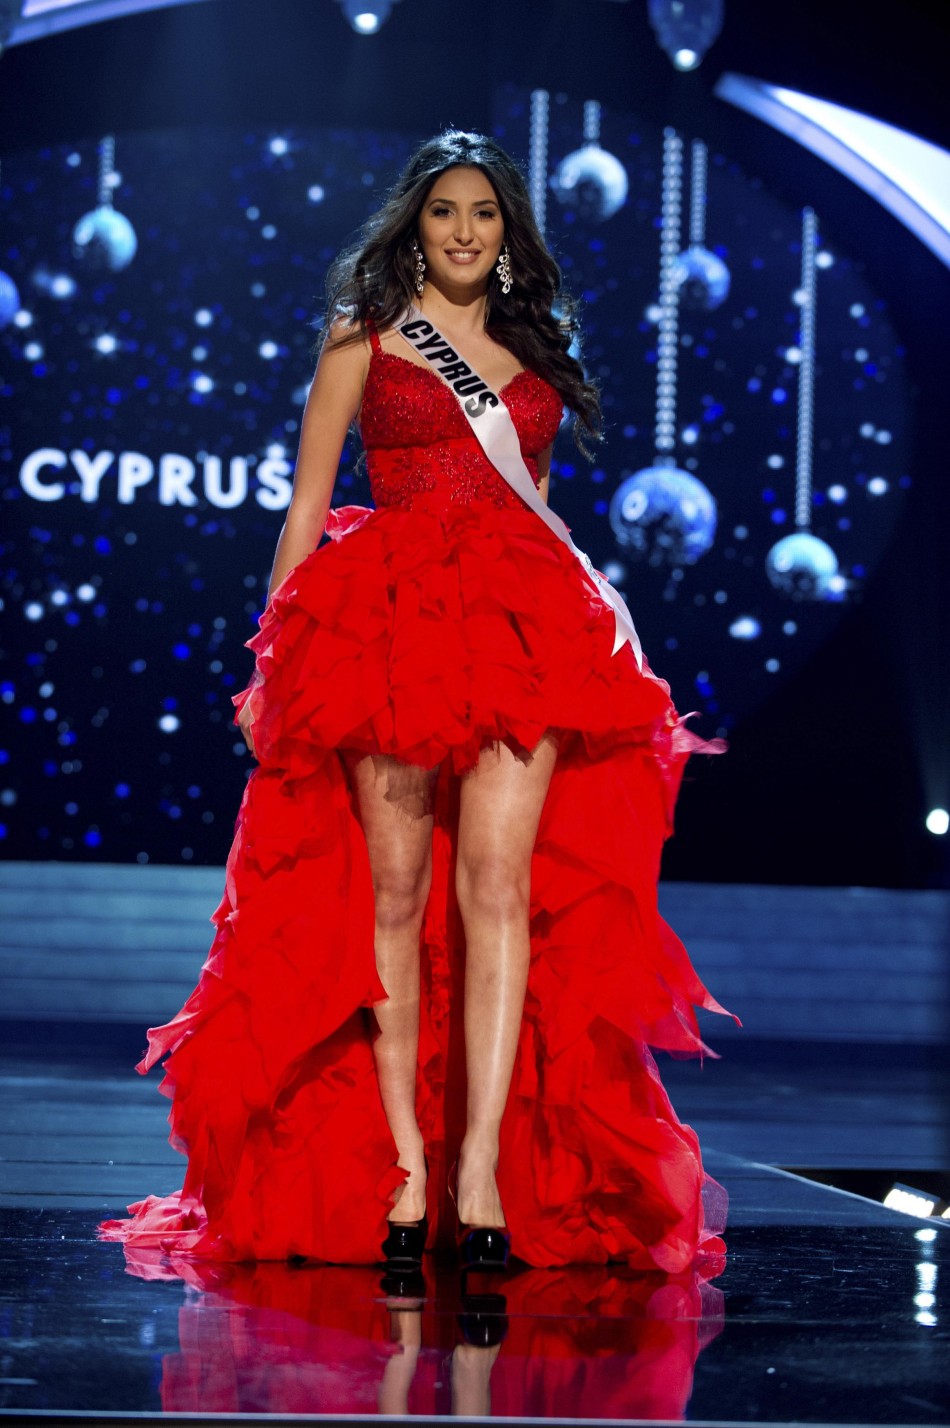 Miss Cyprus 2012 Yiannakou competes in an evening gown of her choice during the Evening Gown Competition of the 2012 Miss Universe Presentation Show in Las Vegas